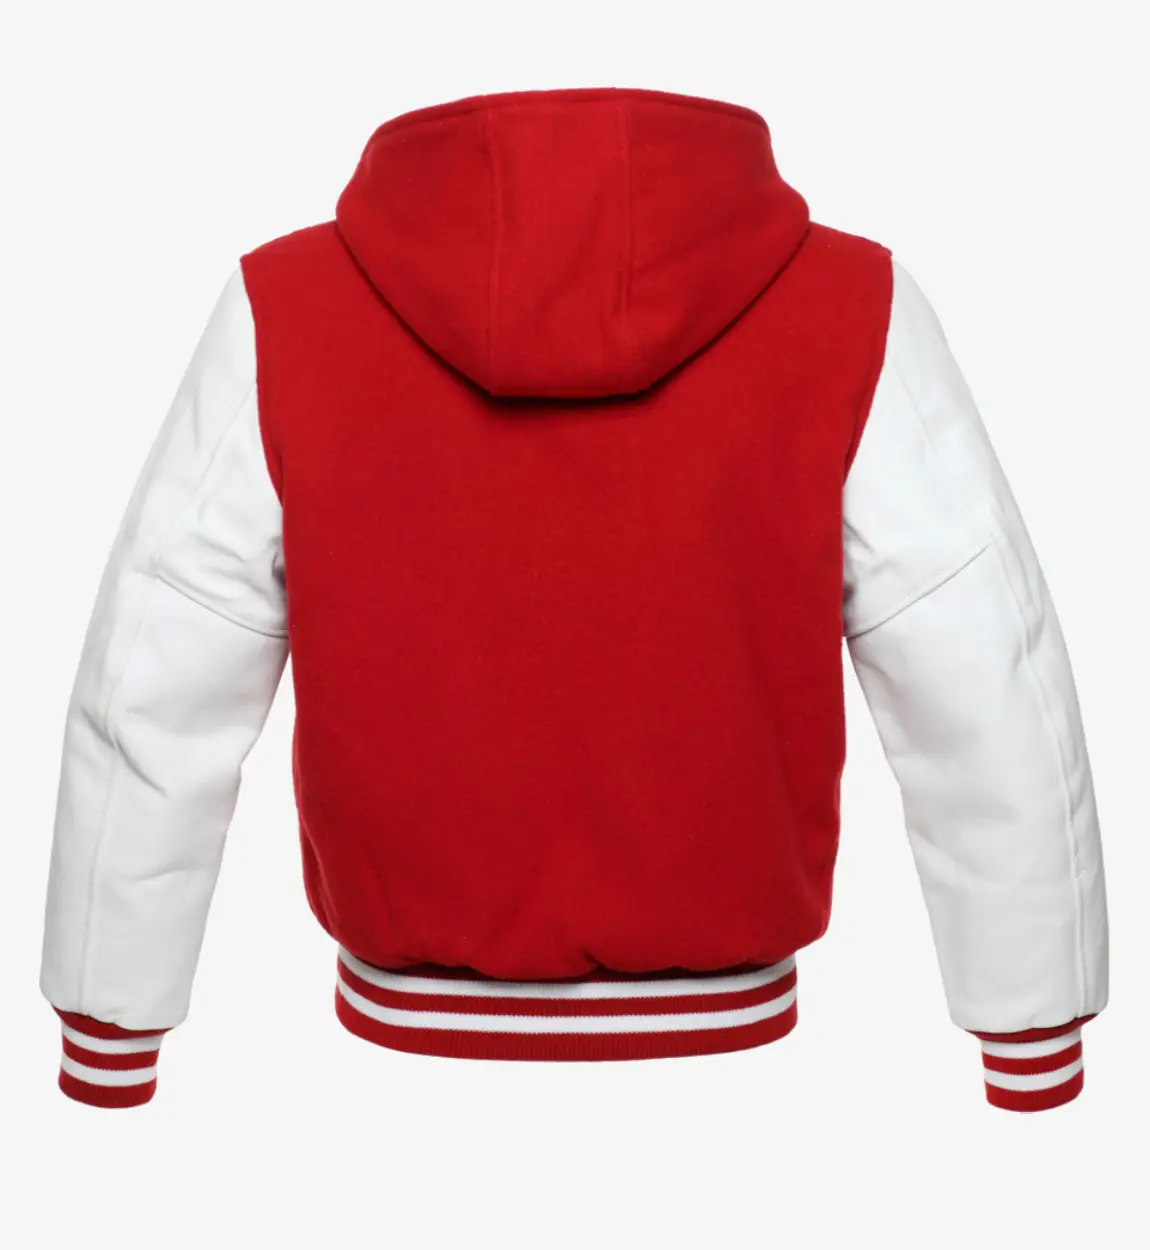 Hooded Wool and Leather Varsity Jacket Tendon Sports